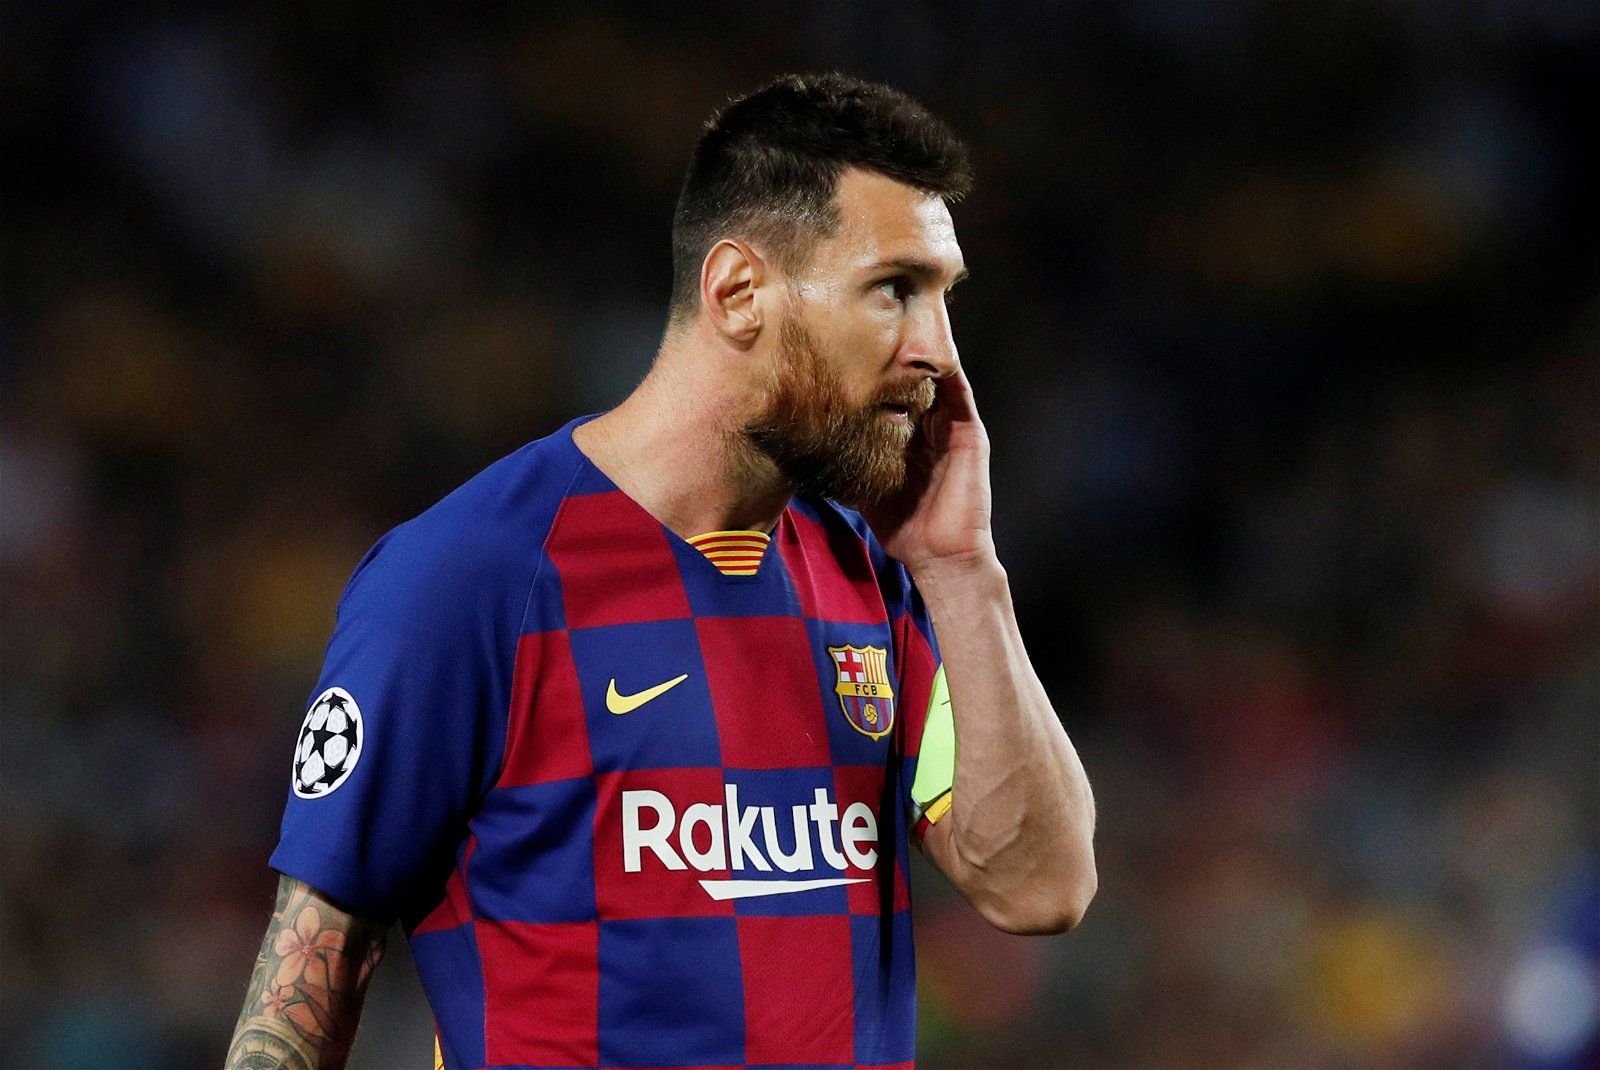 Football superstar Lionel Messi wanted Barcelona exit in the past